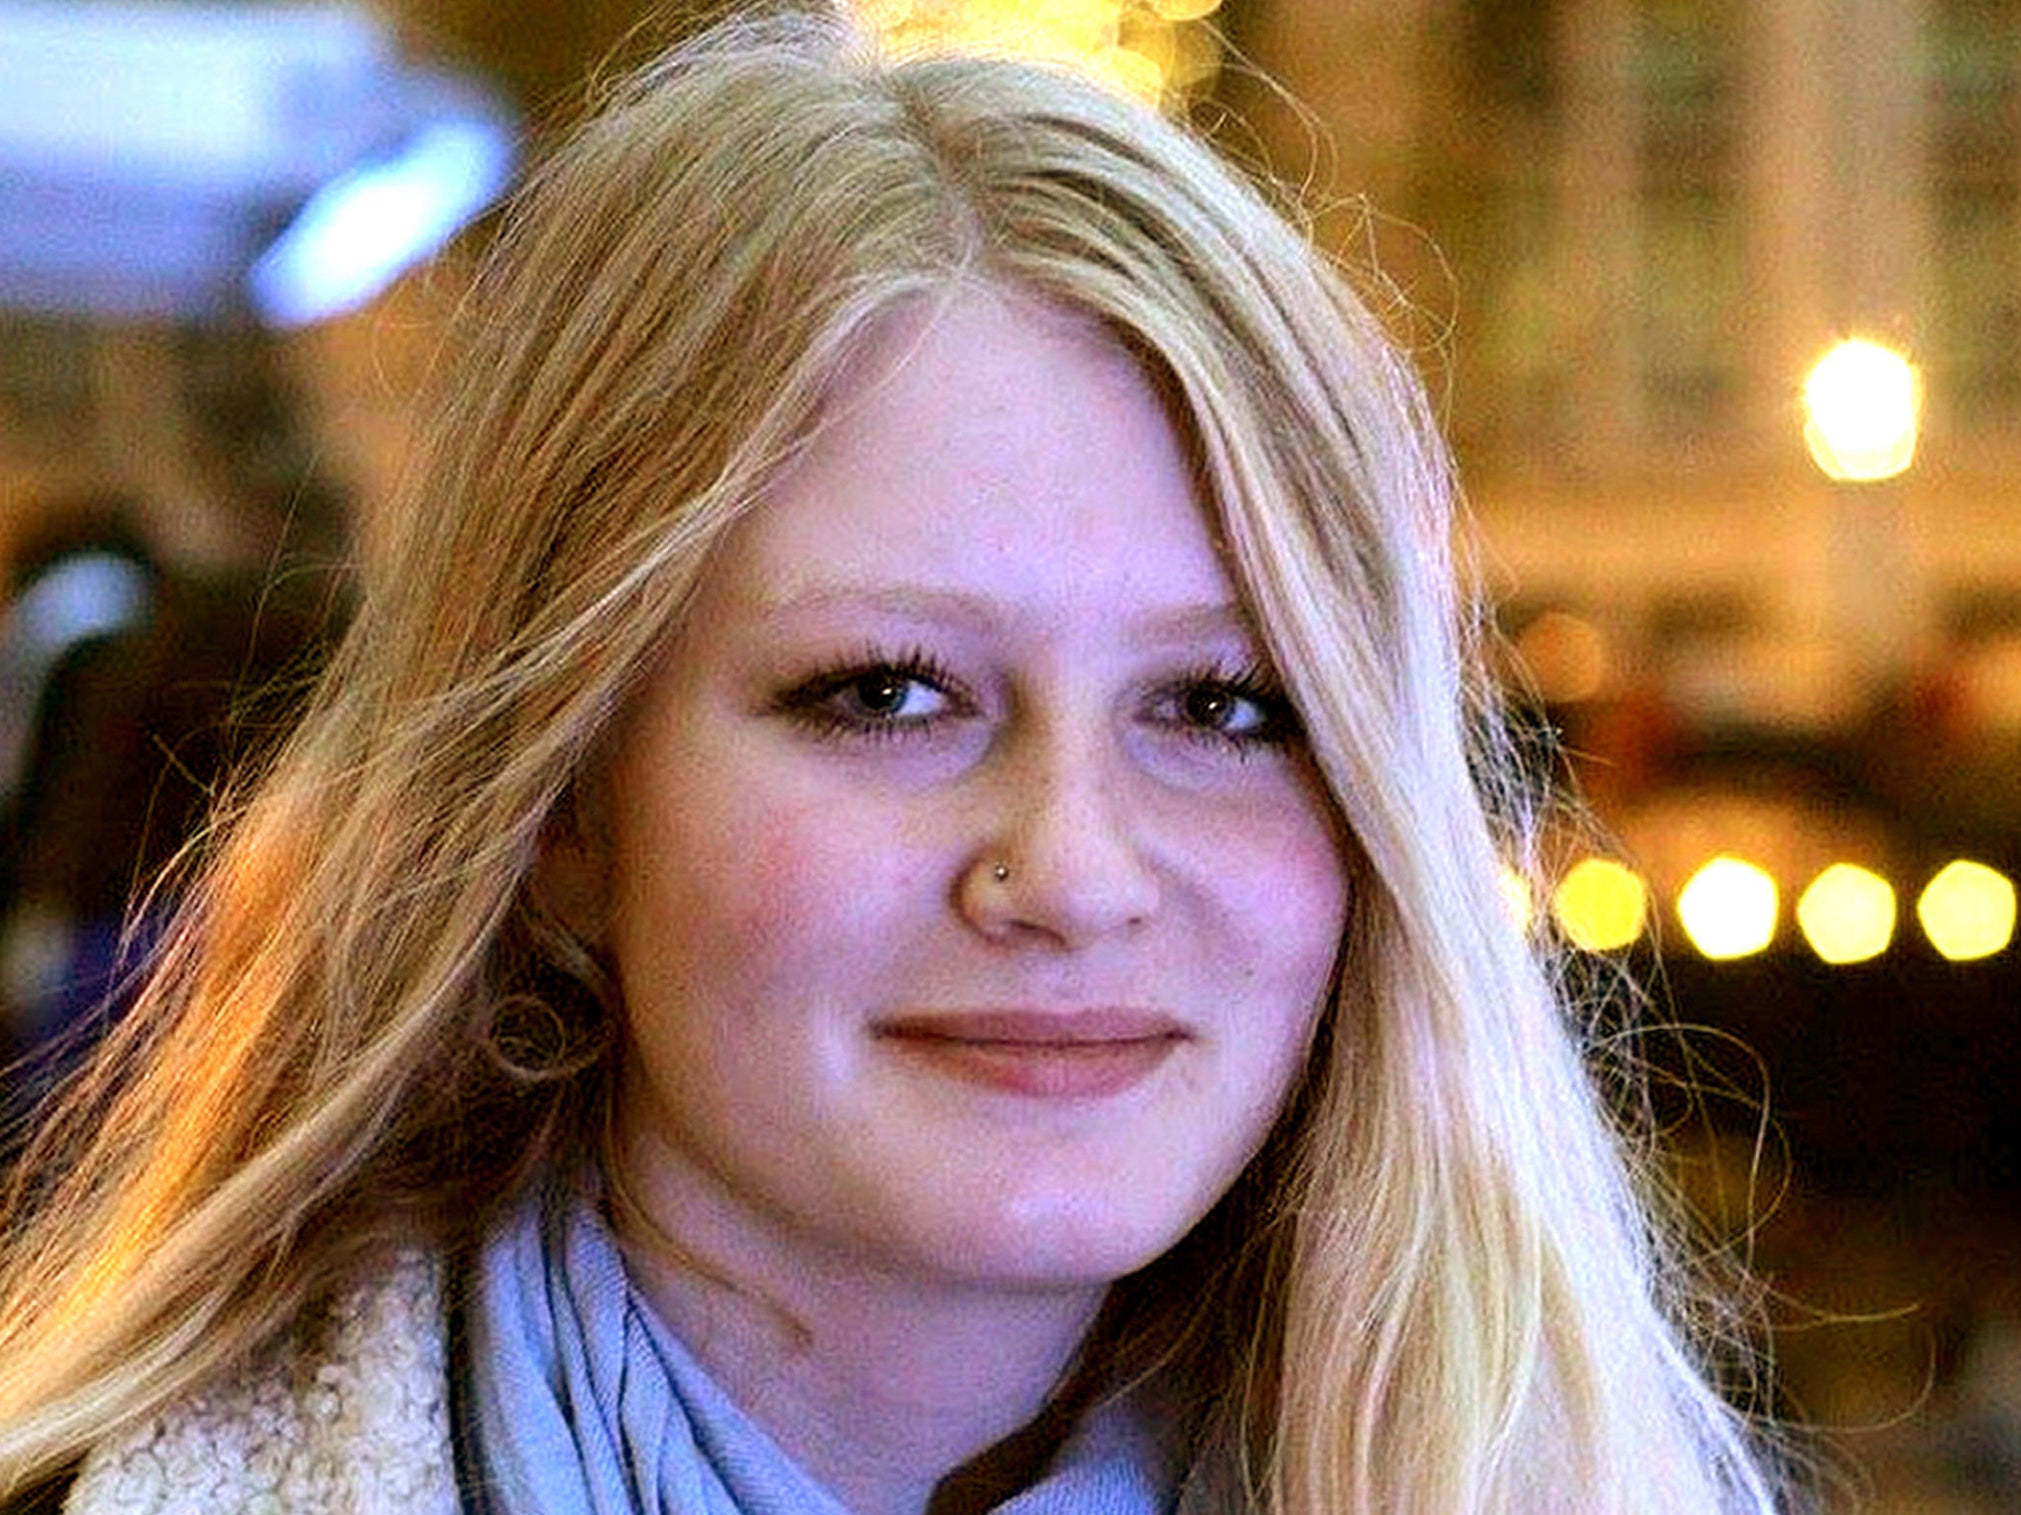 Police said they were 'confident' the body was that of missing Gaia Pope